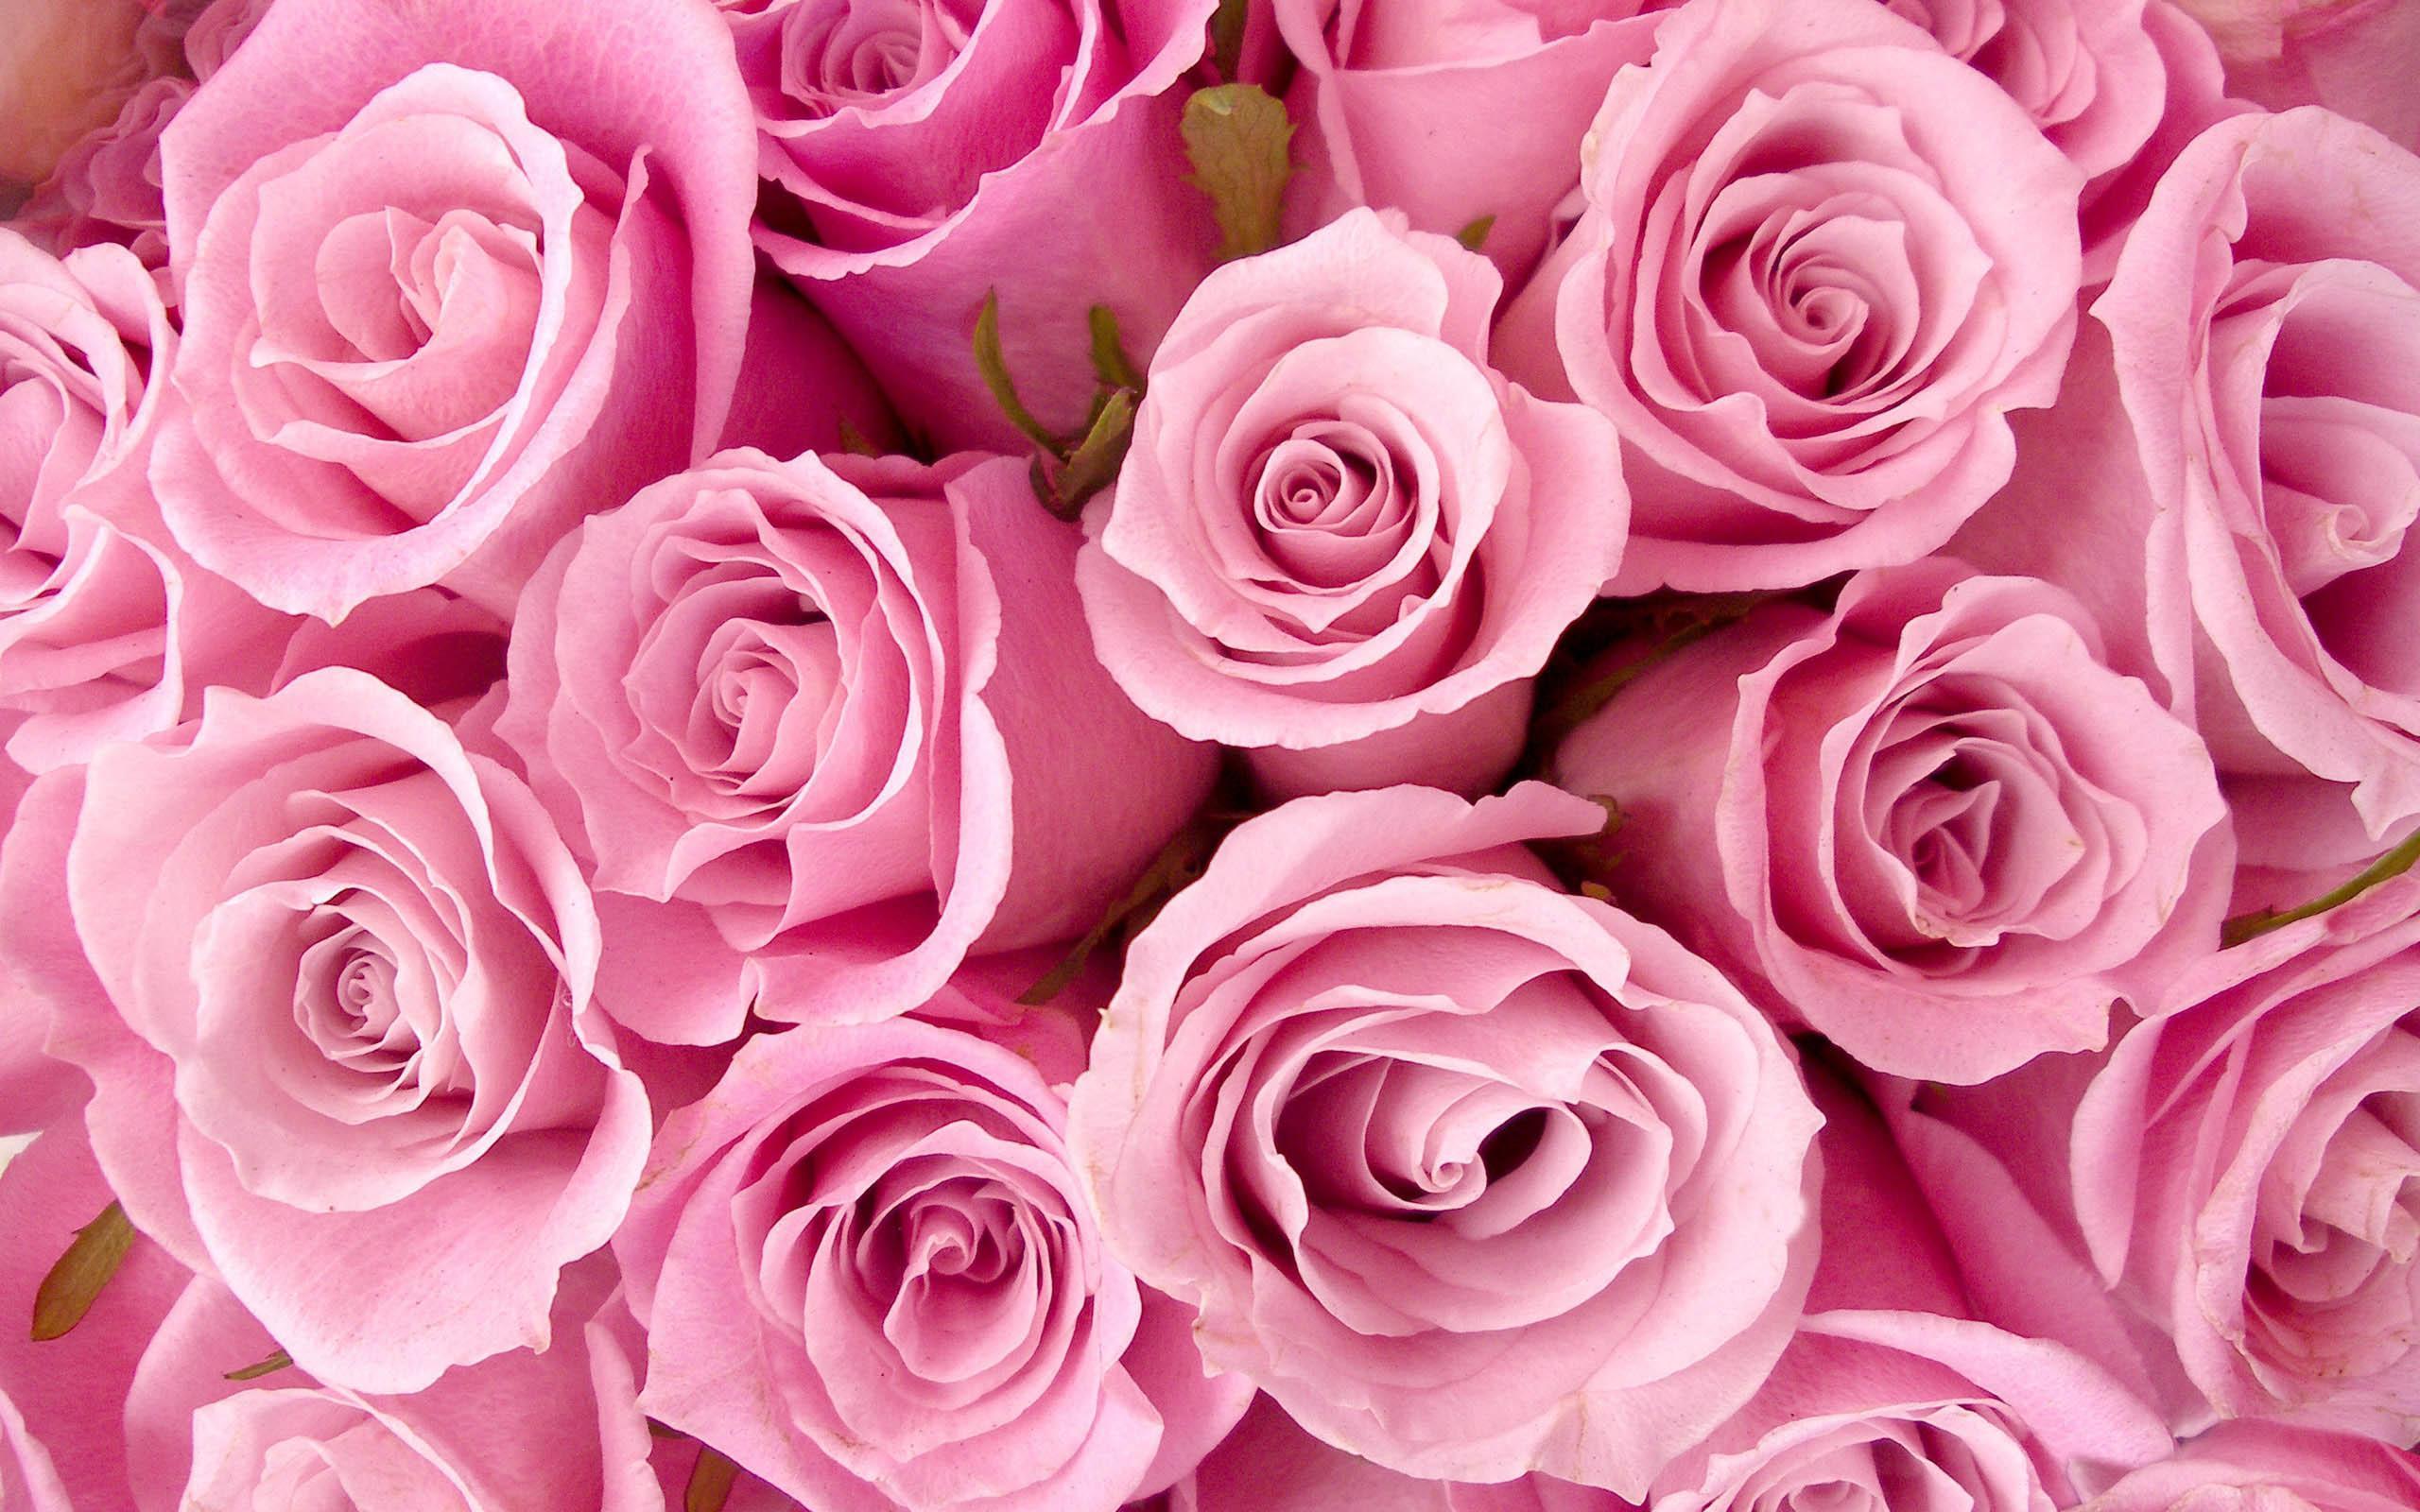 Pretty Pink Rose Colors Wallpaper 2560x1600 px Free Download